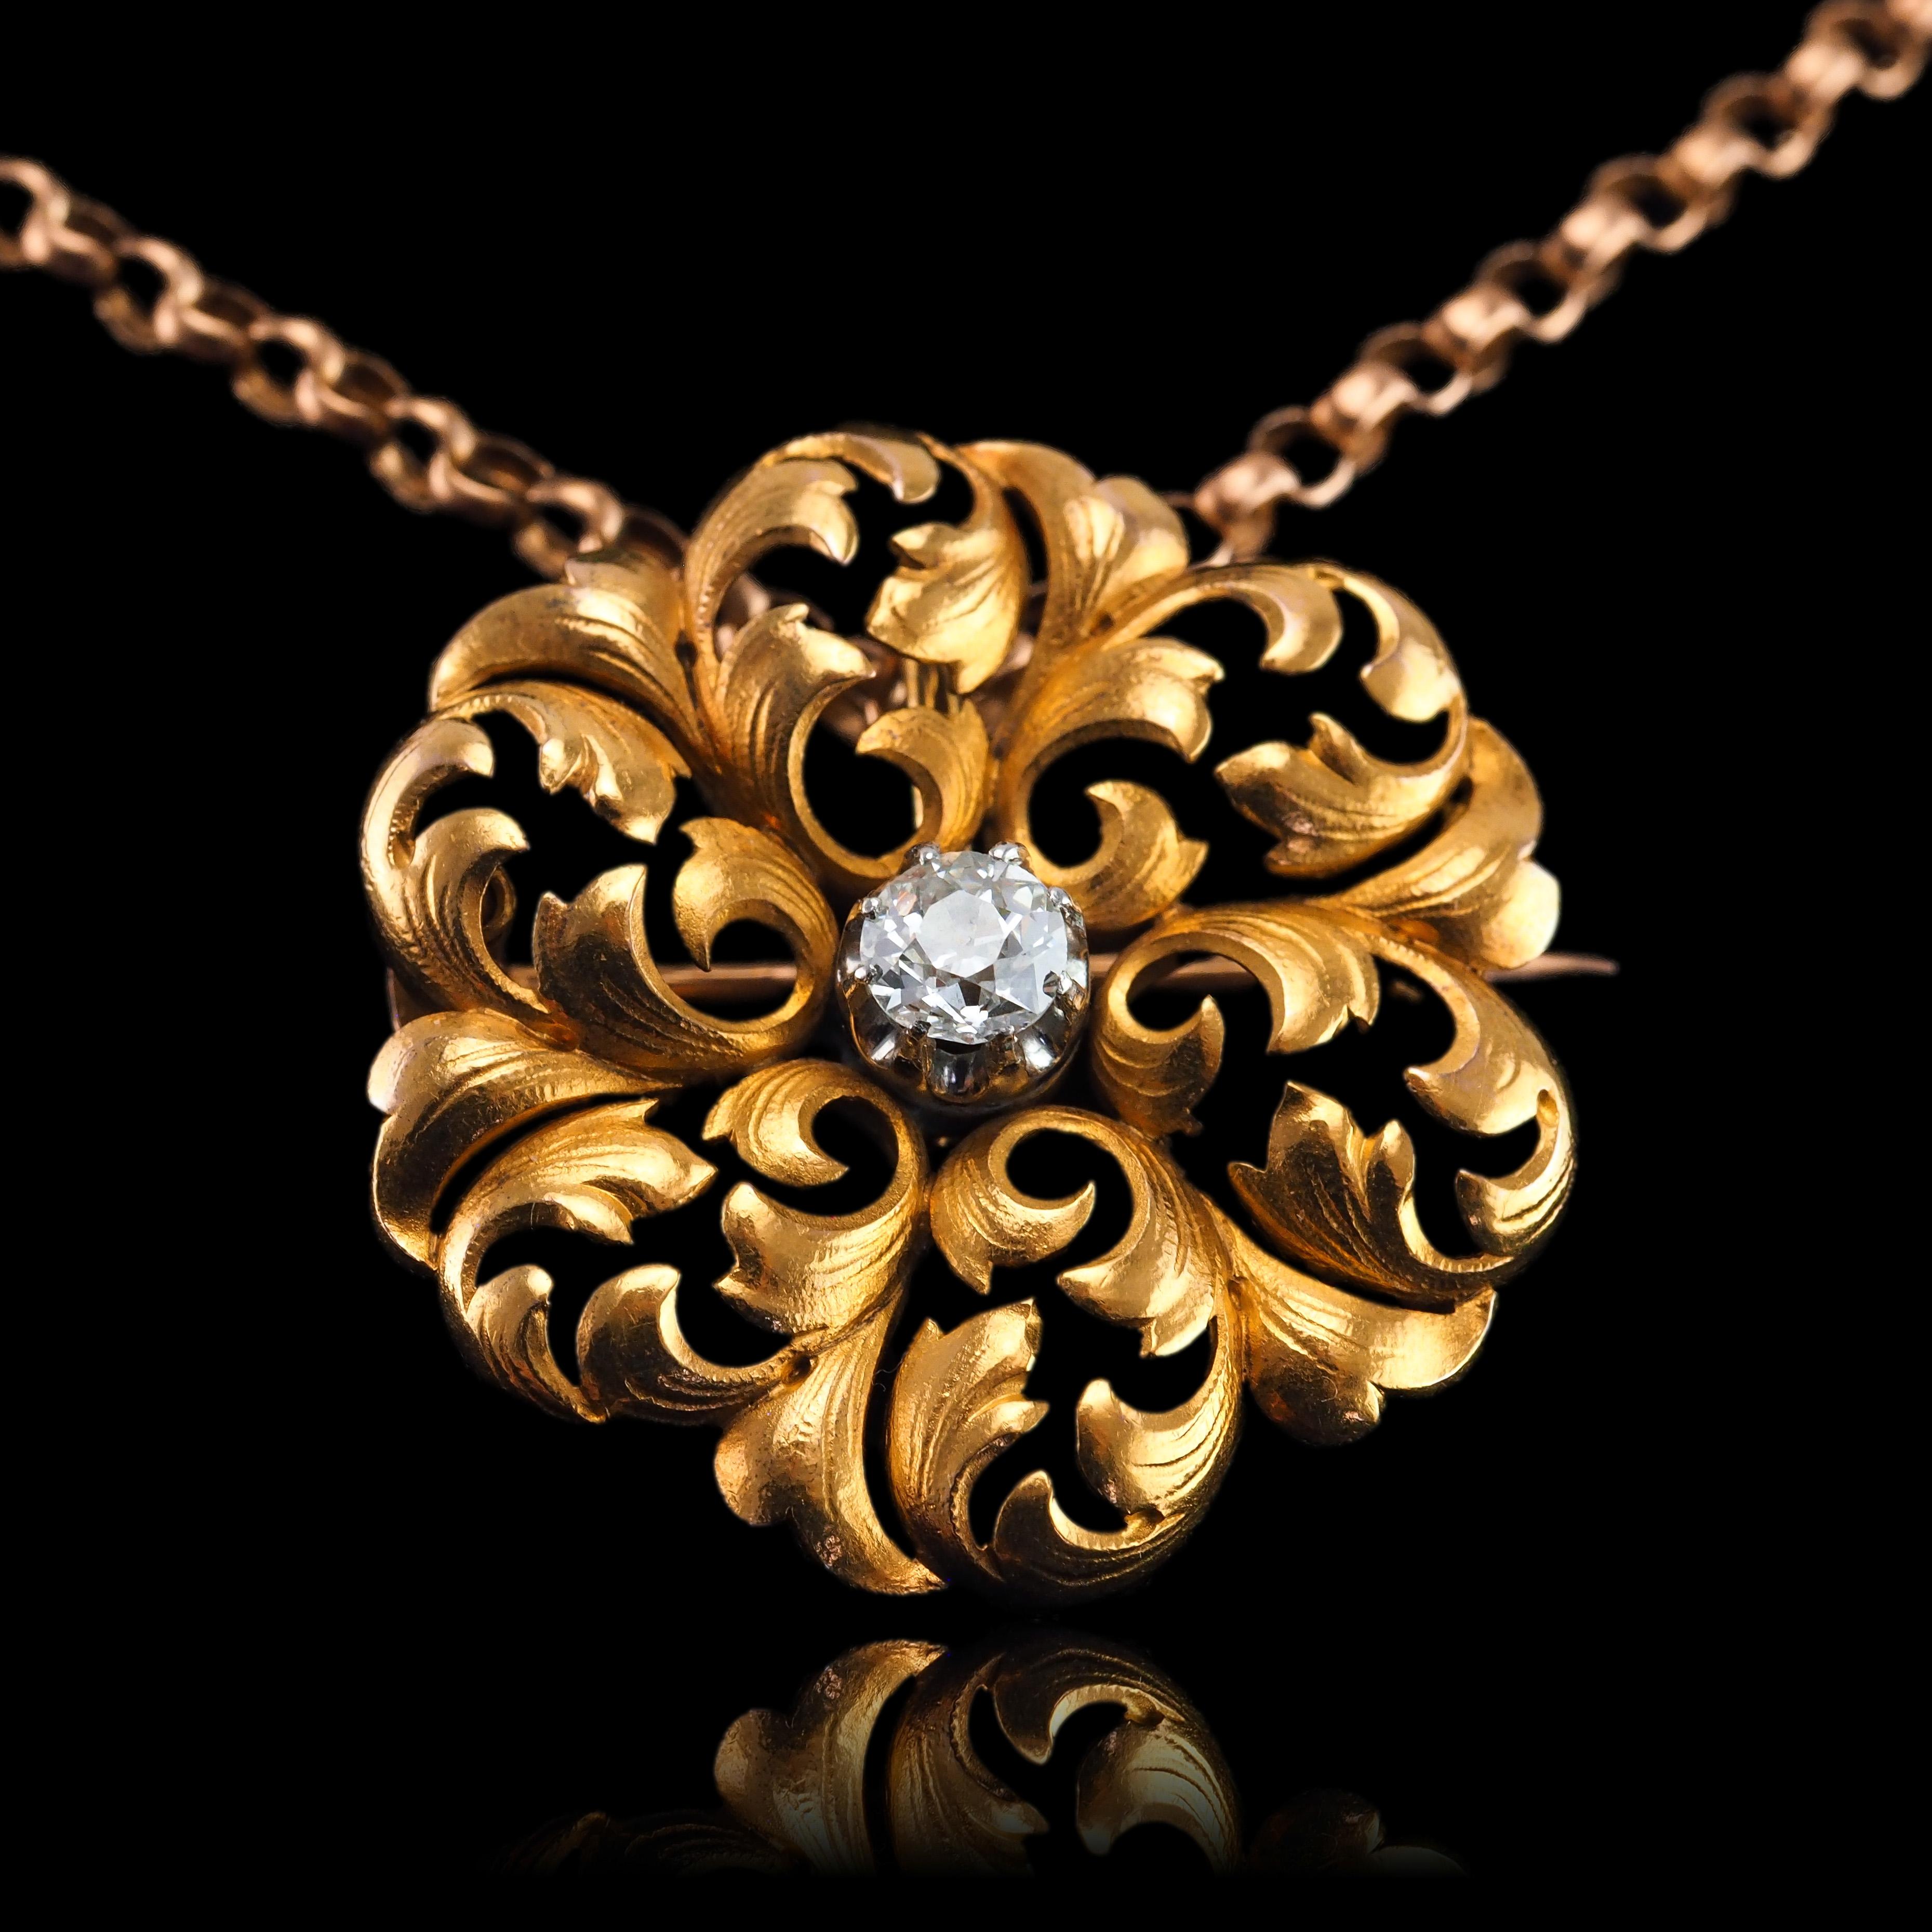 Antique French Diamond Necklace 18K Gold Pendant Brooch 19th C. Flower Acanthus For Sale 15